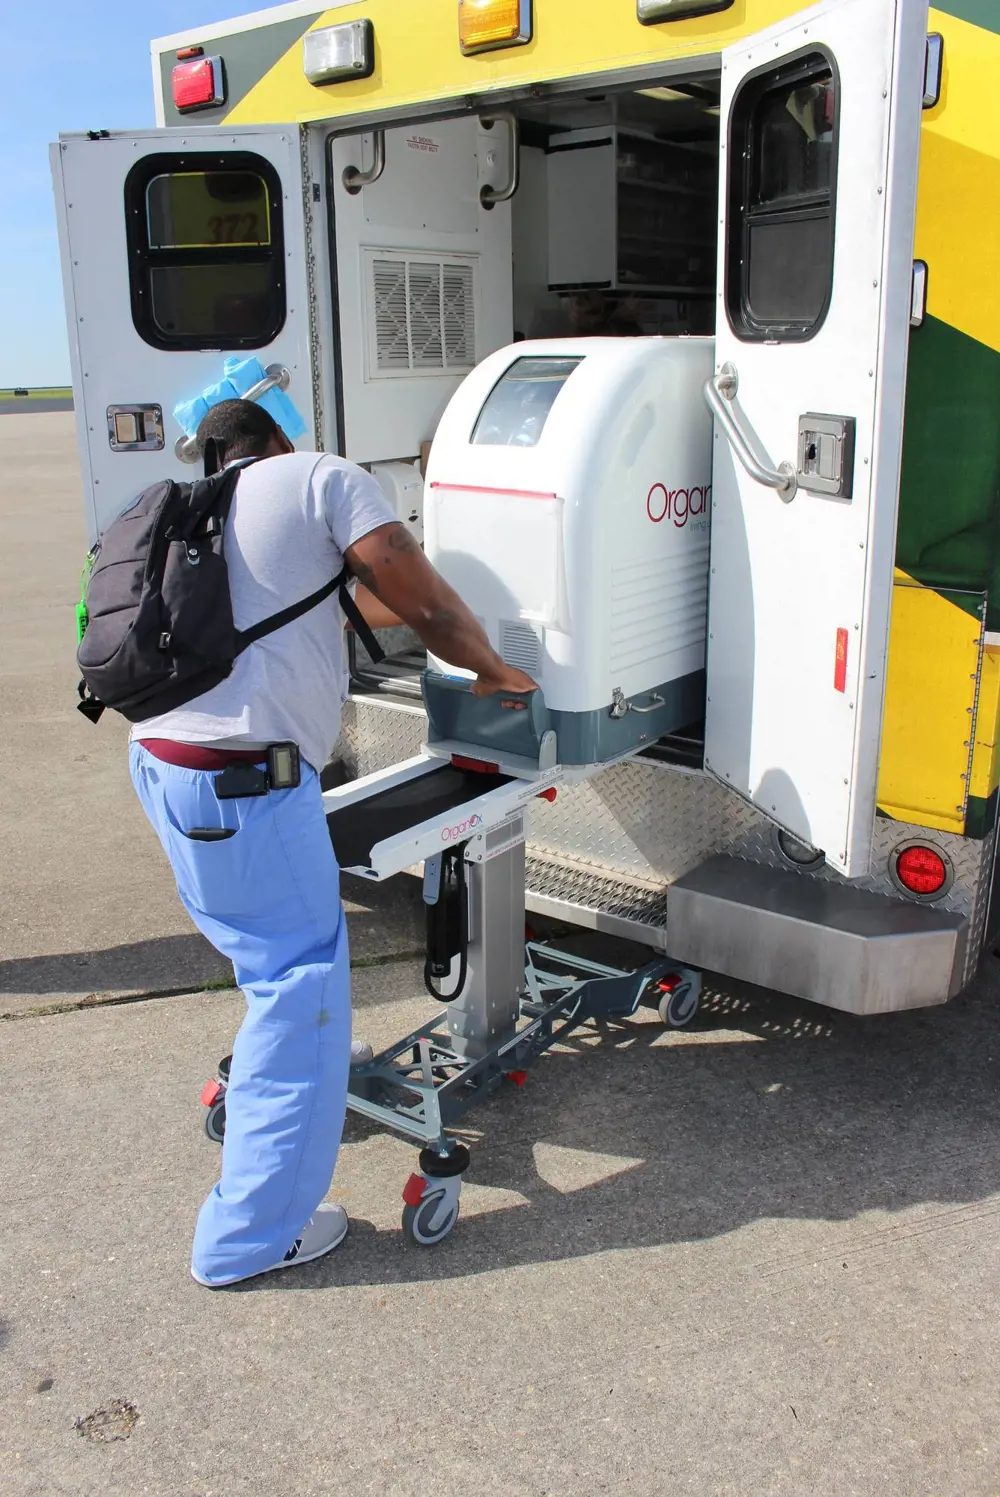 The OrganOx metra container being loaded into the back of an ambulance using a stand on wheels to slide it in.